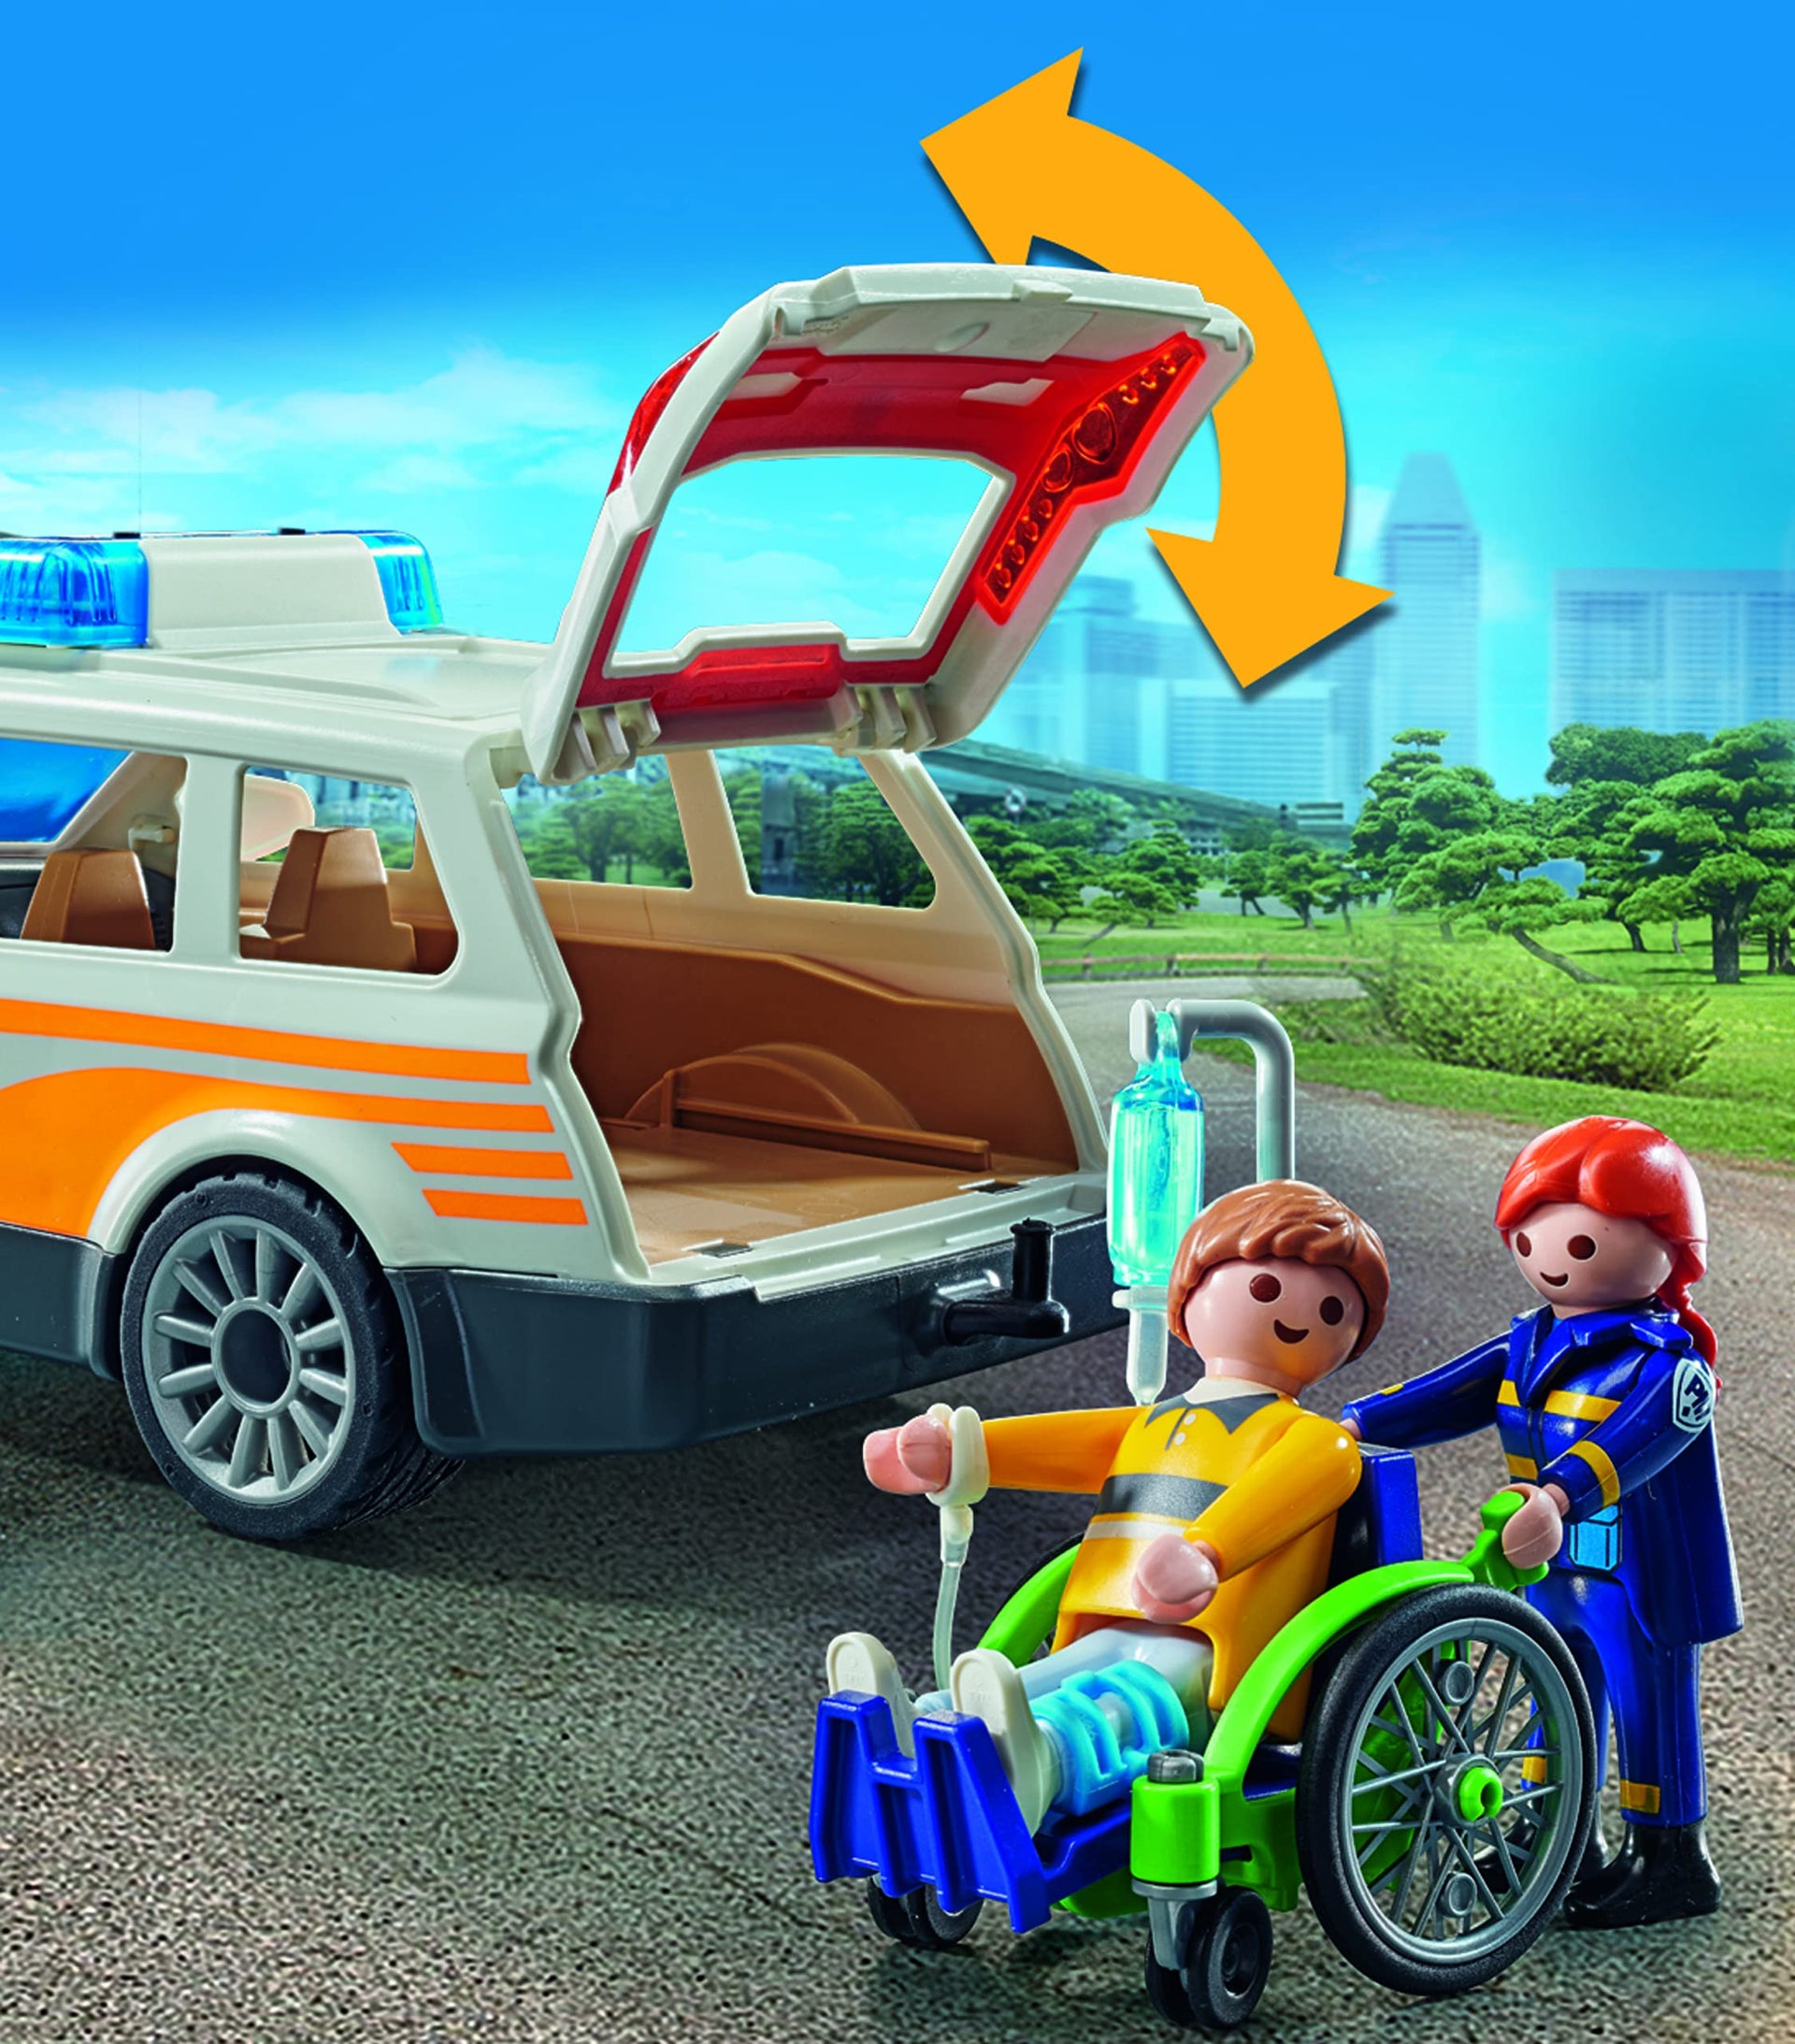 Playmobil Doctor with Equipment transparent PNG - StickPNG